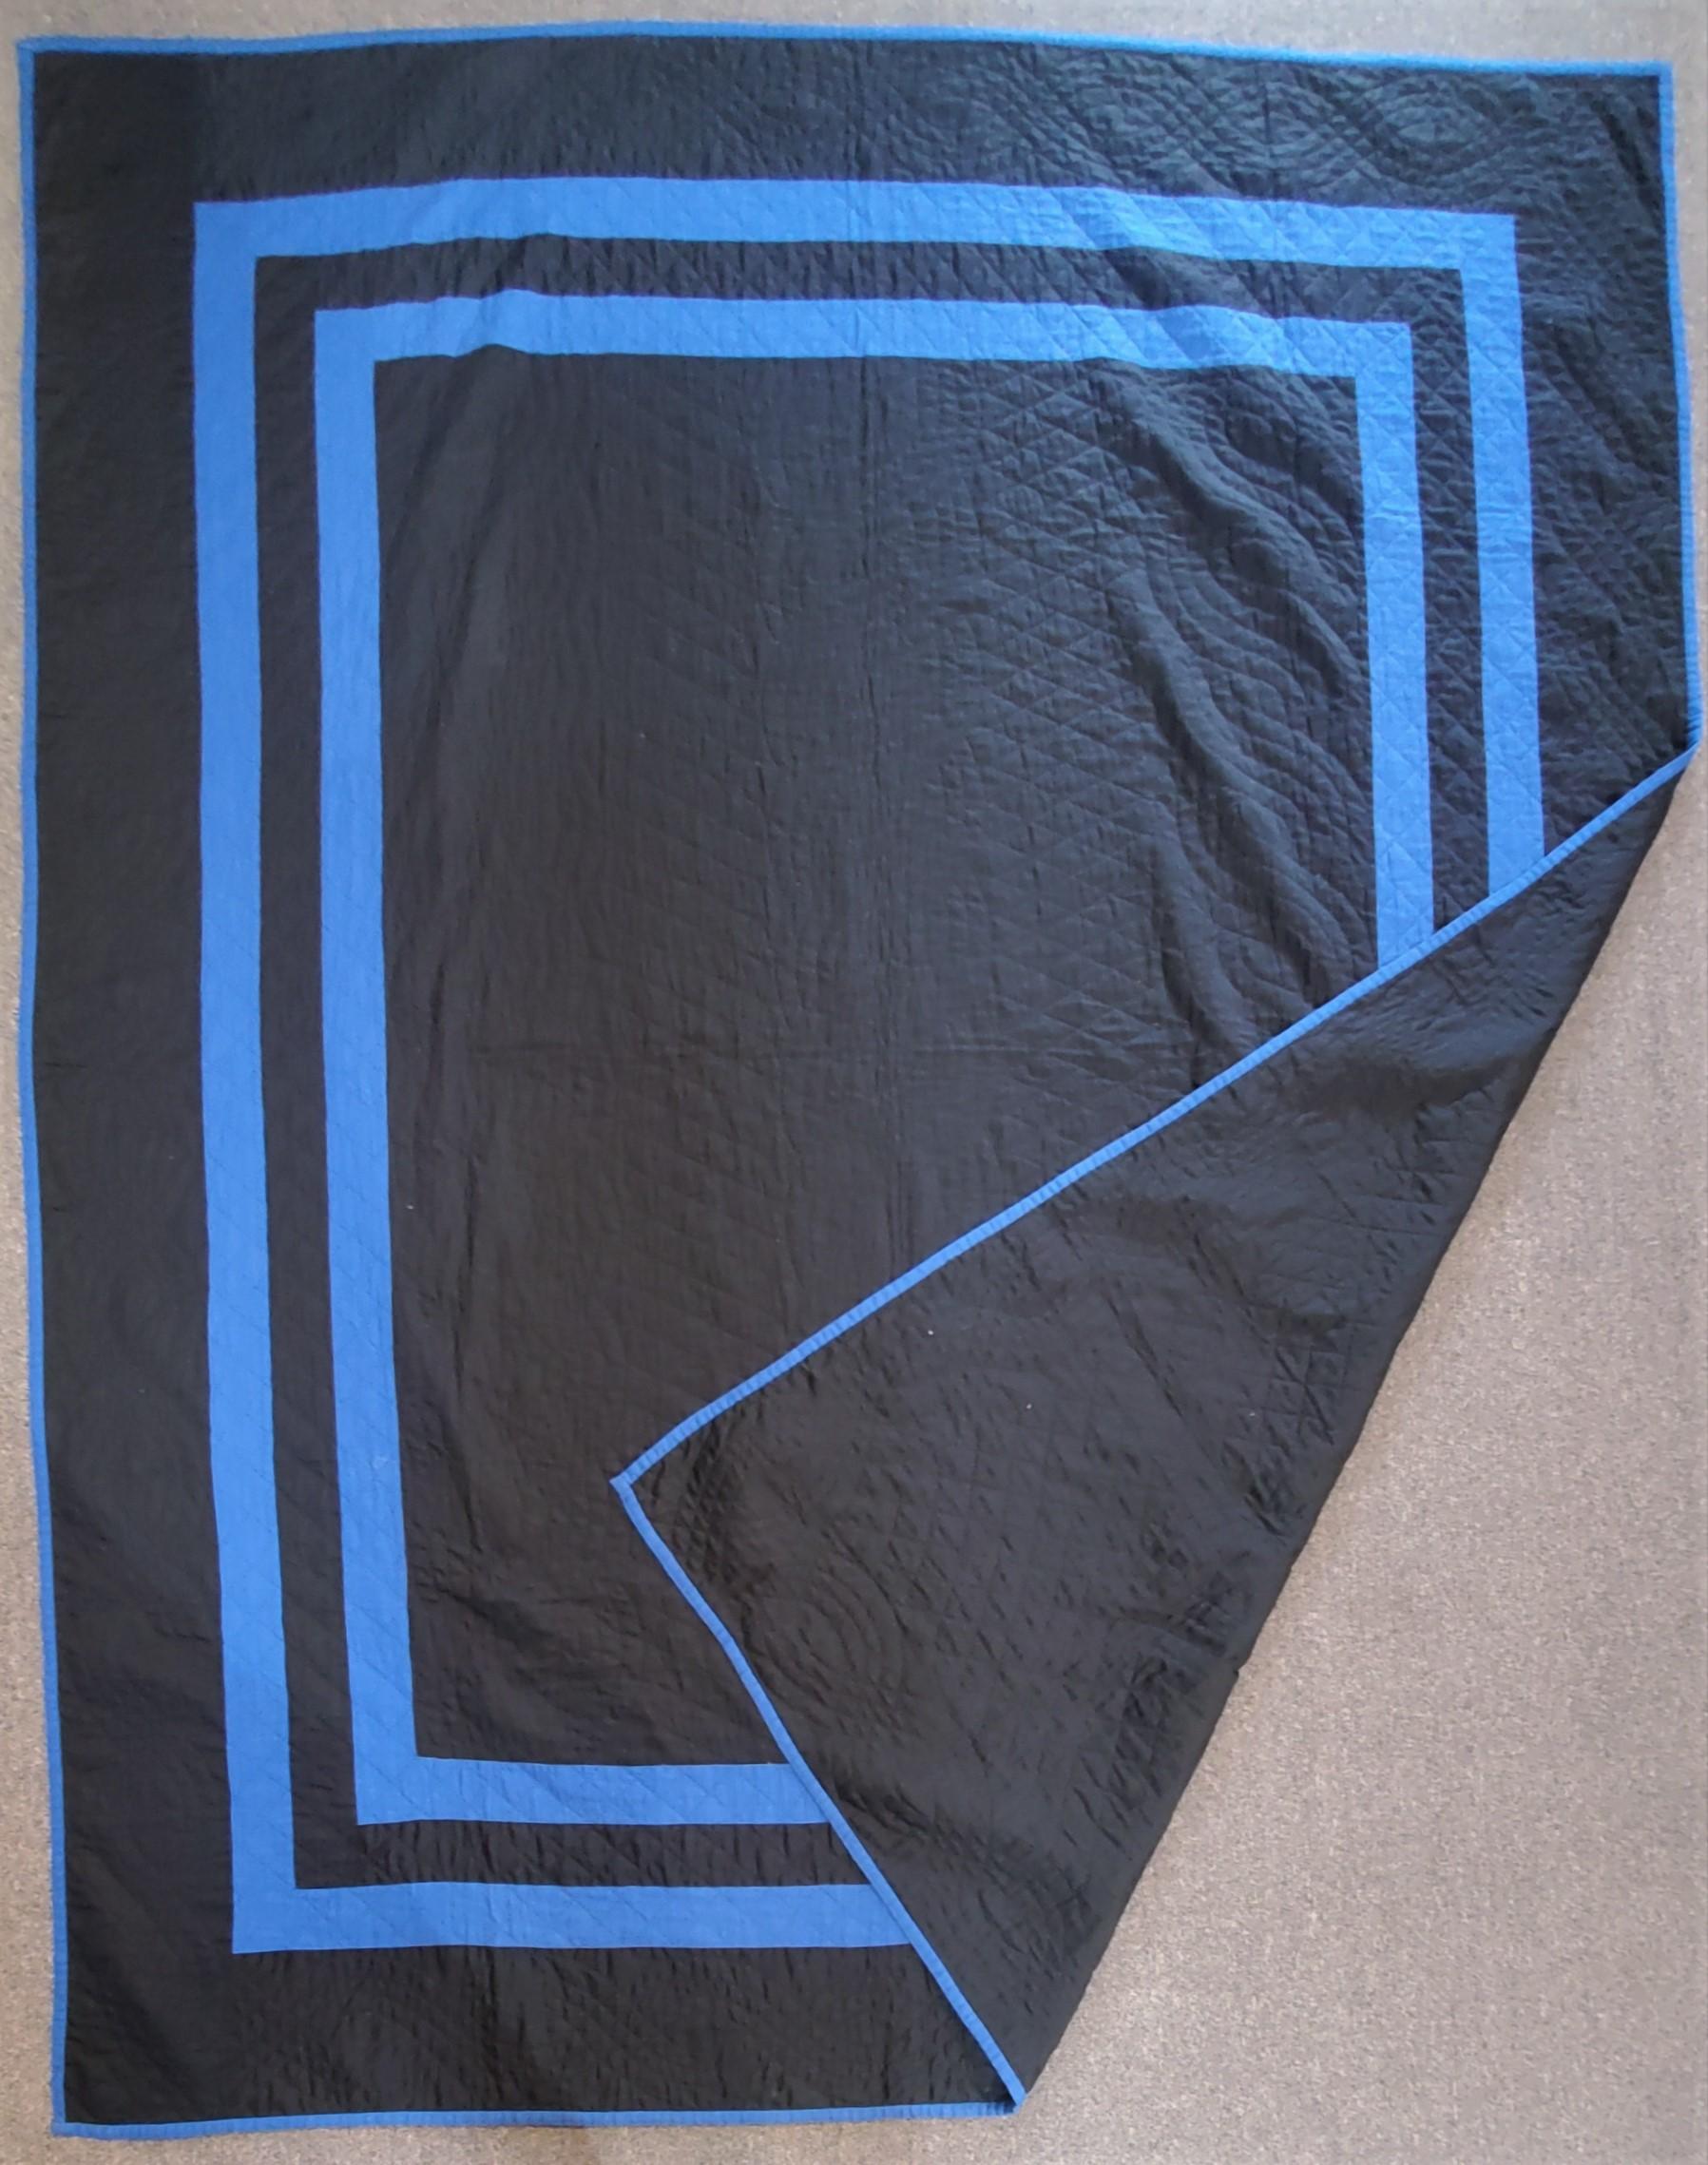 This fine black cotton sateen plain quilt is from Holmes County, Ohio and from the thirties. This finely quilted Ohio Amish plain quilt is in pristine condition and quite unusual.